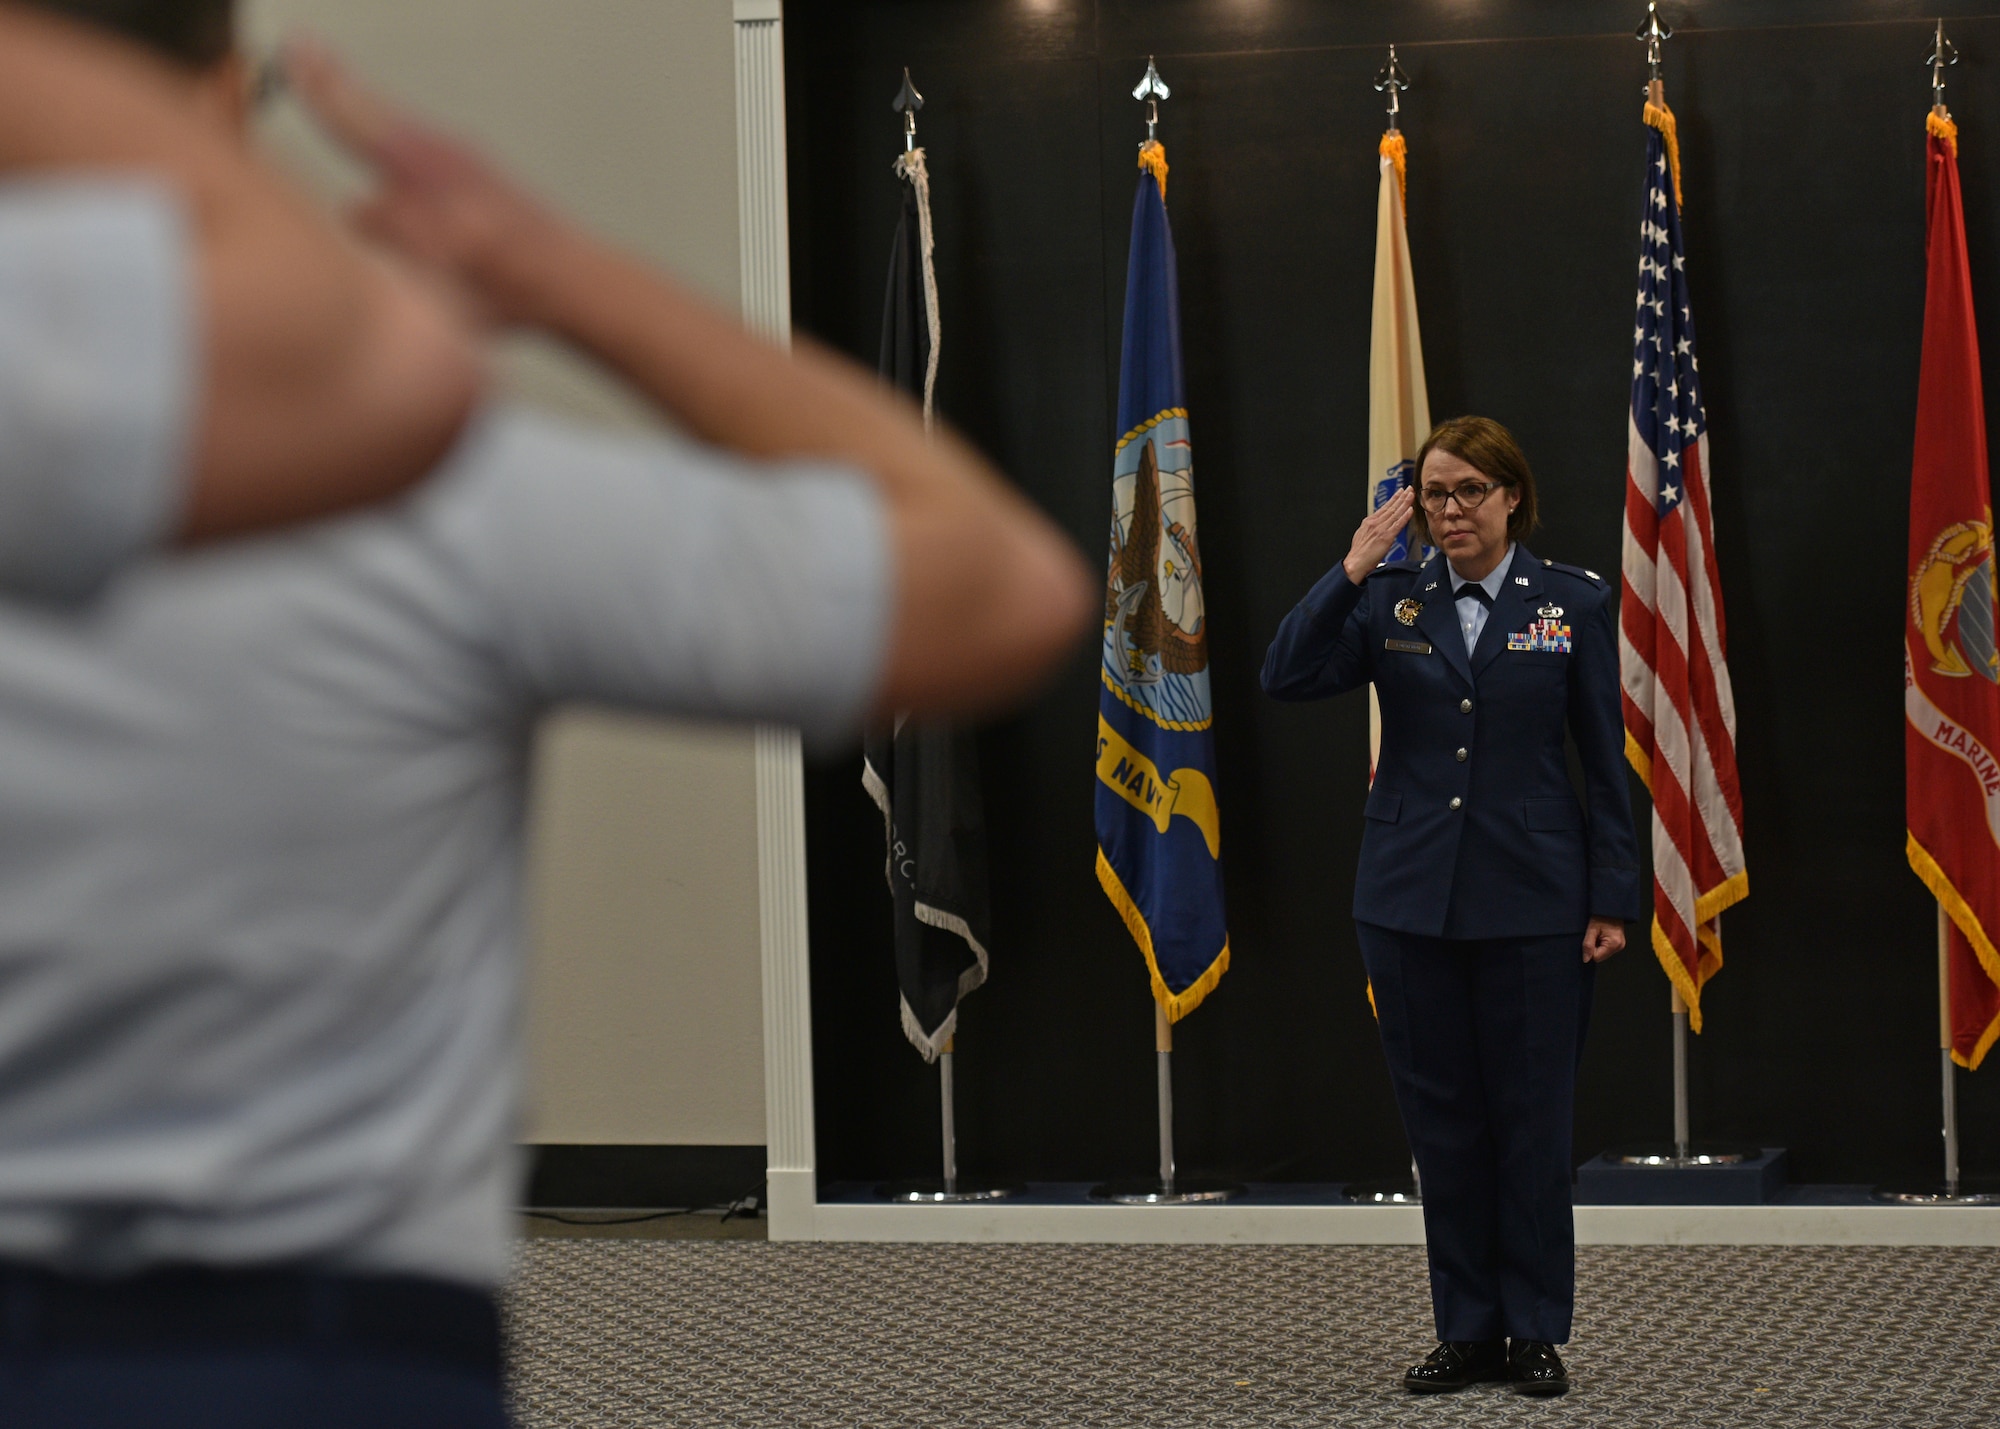 Members of the 17th Training Support Squadron salute U.S. Air Force Lt. Col. Renee Fontenot, 17th TRSS incoming commander, at the 17th TRSS change of command ceremony at the Powell Event Center, Goodfellow Air Force Base, Texas, June 17, 2022. Fontenot was previously stationed at the Pentagon in Washington, D.C. (U.S. Air Force photo by Senior Airman Ashley Thrash)